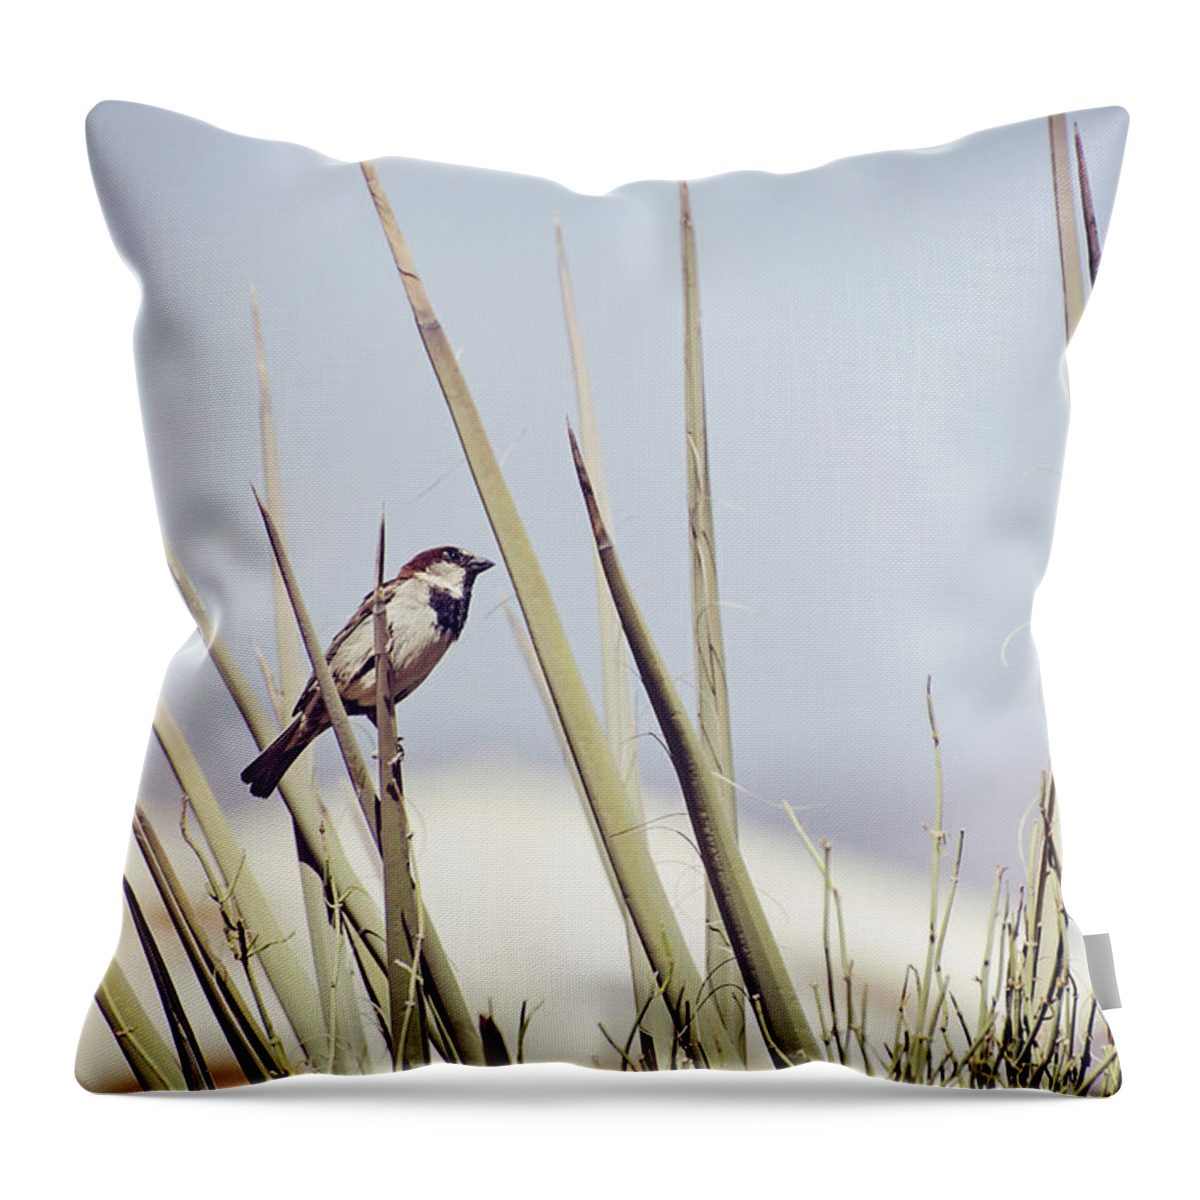 House Sparrow Throw Pillow featuring the photograph Sparrow on the Yucca by Heather Applegate